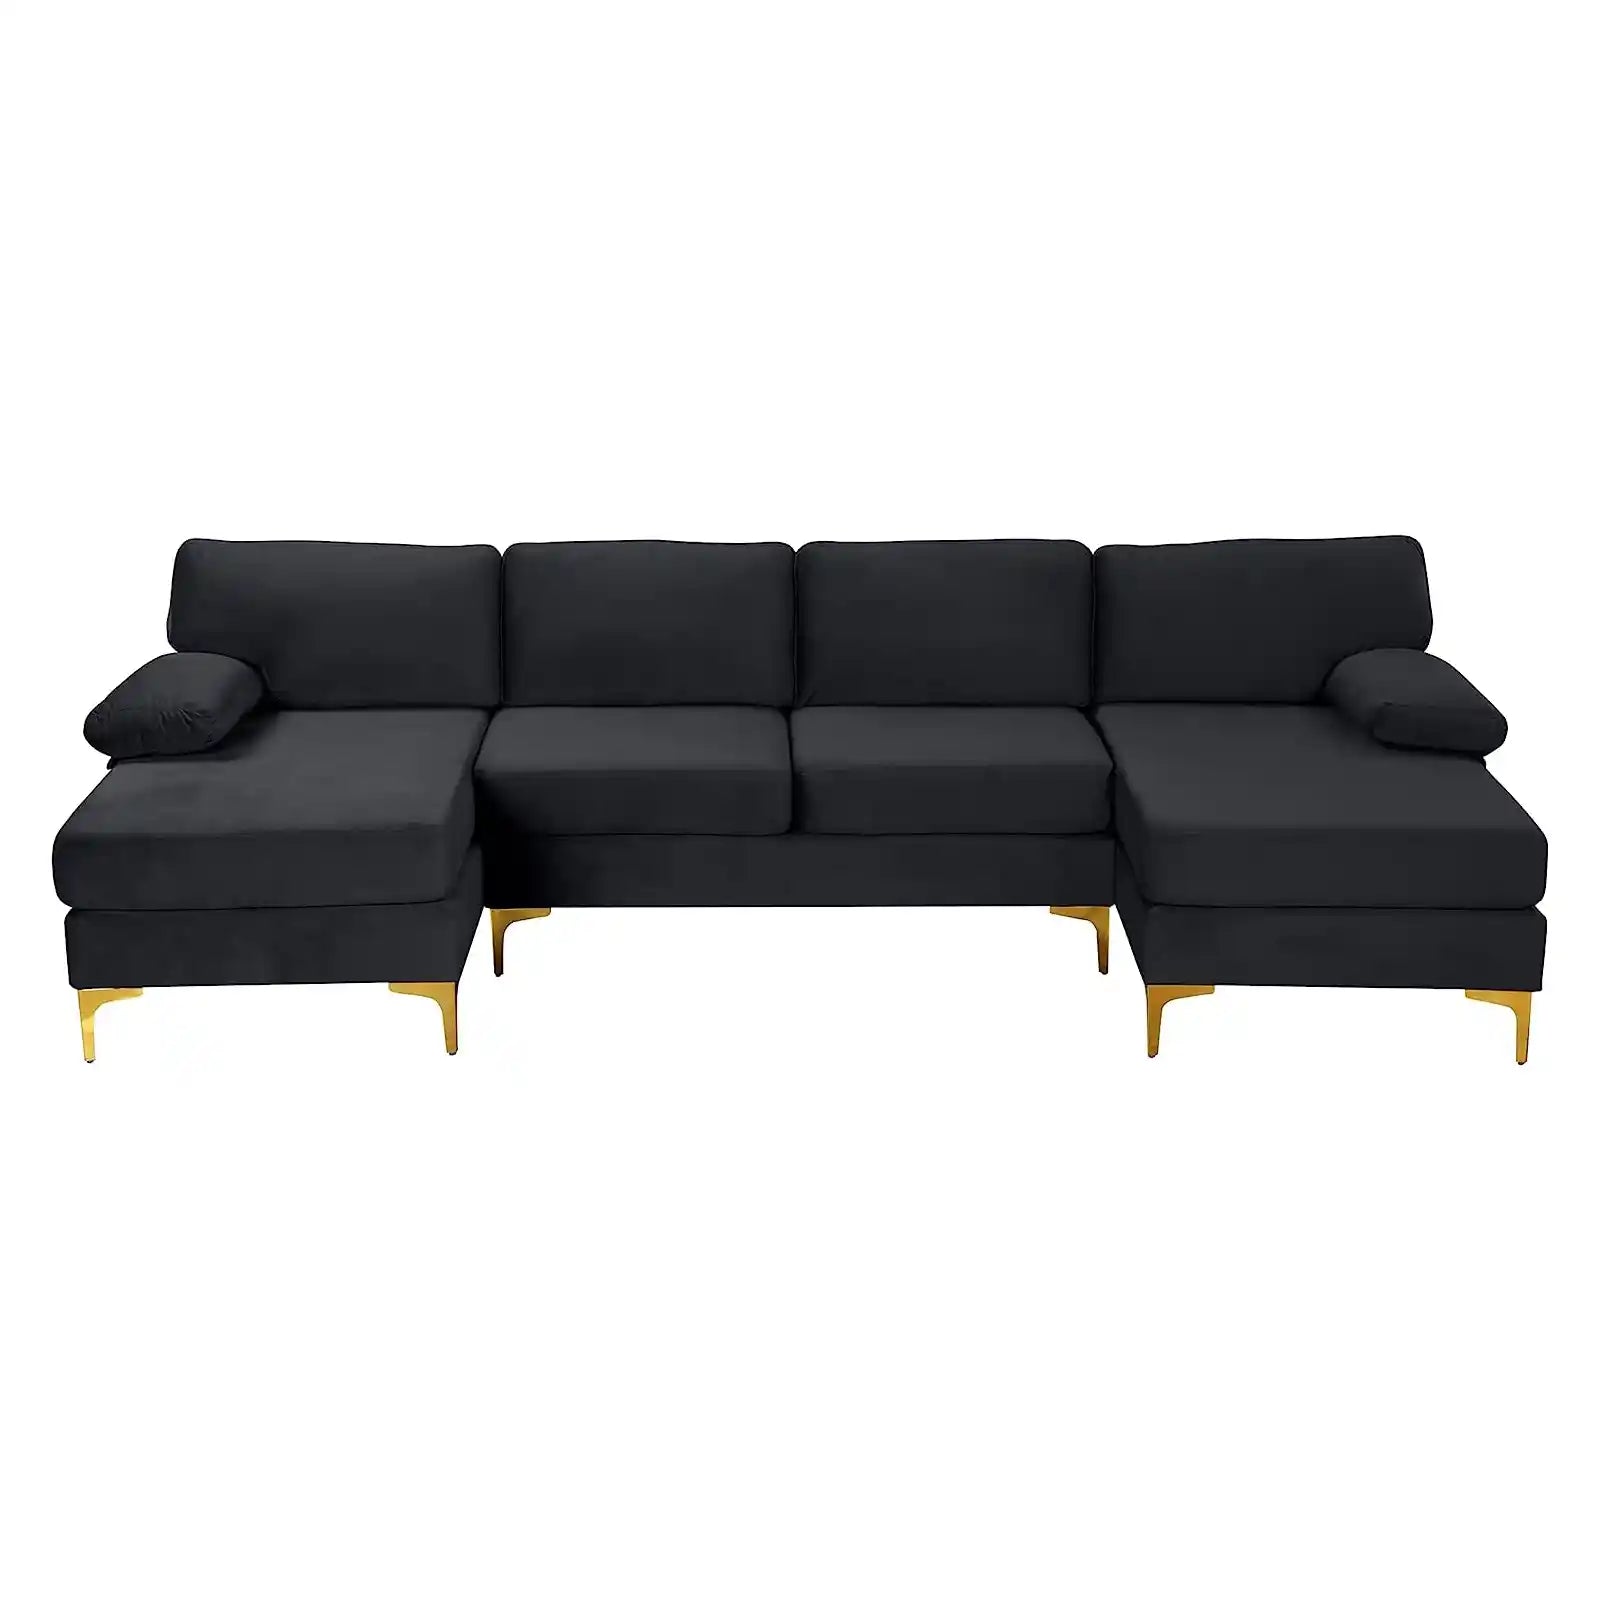 Modern Large Velvet Fabric U-Shape Sectional Sofa, Double Extra Wide Chaise Lounge Couch with Gold Legs